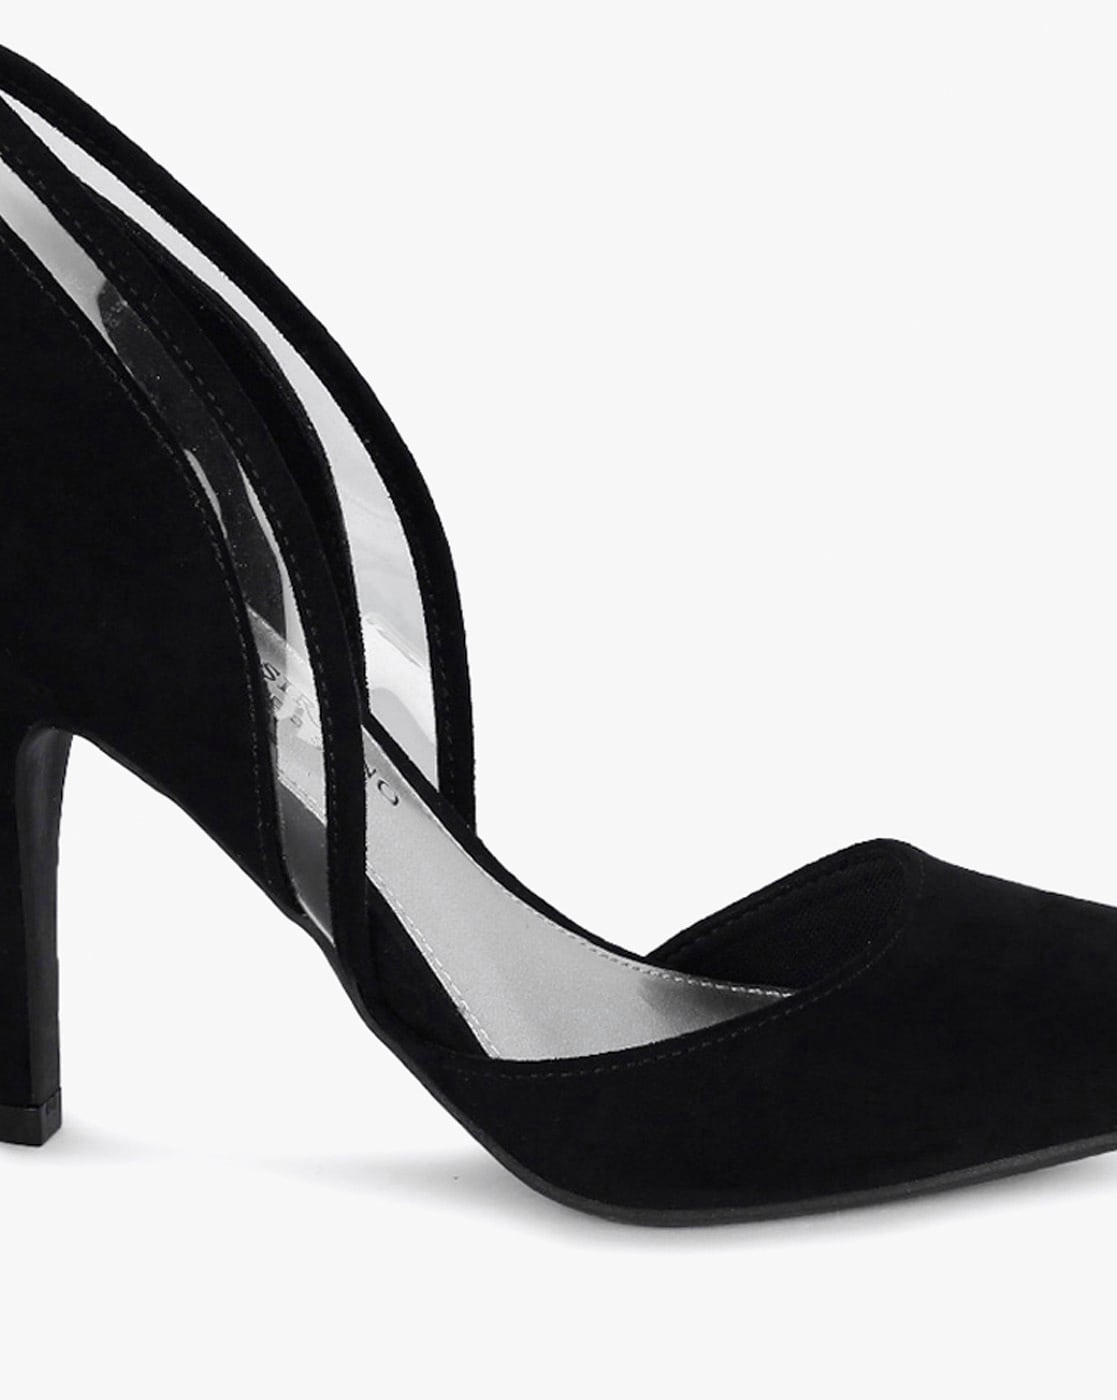 Buy Black Heeled Shoes for Women by 